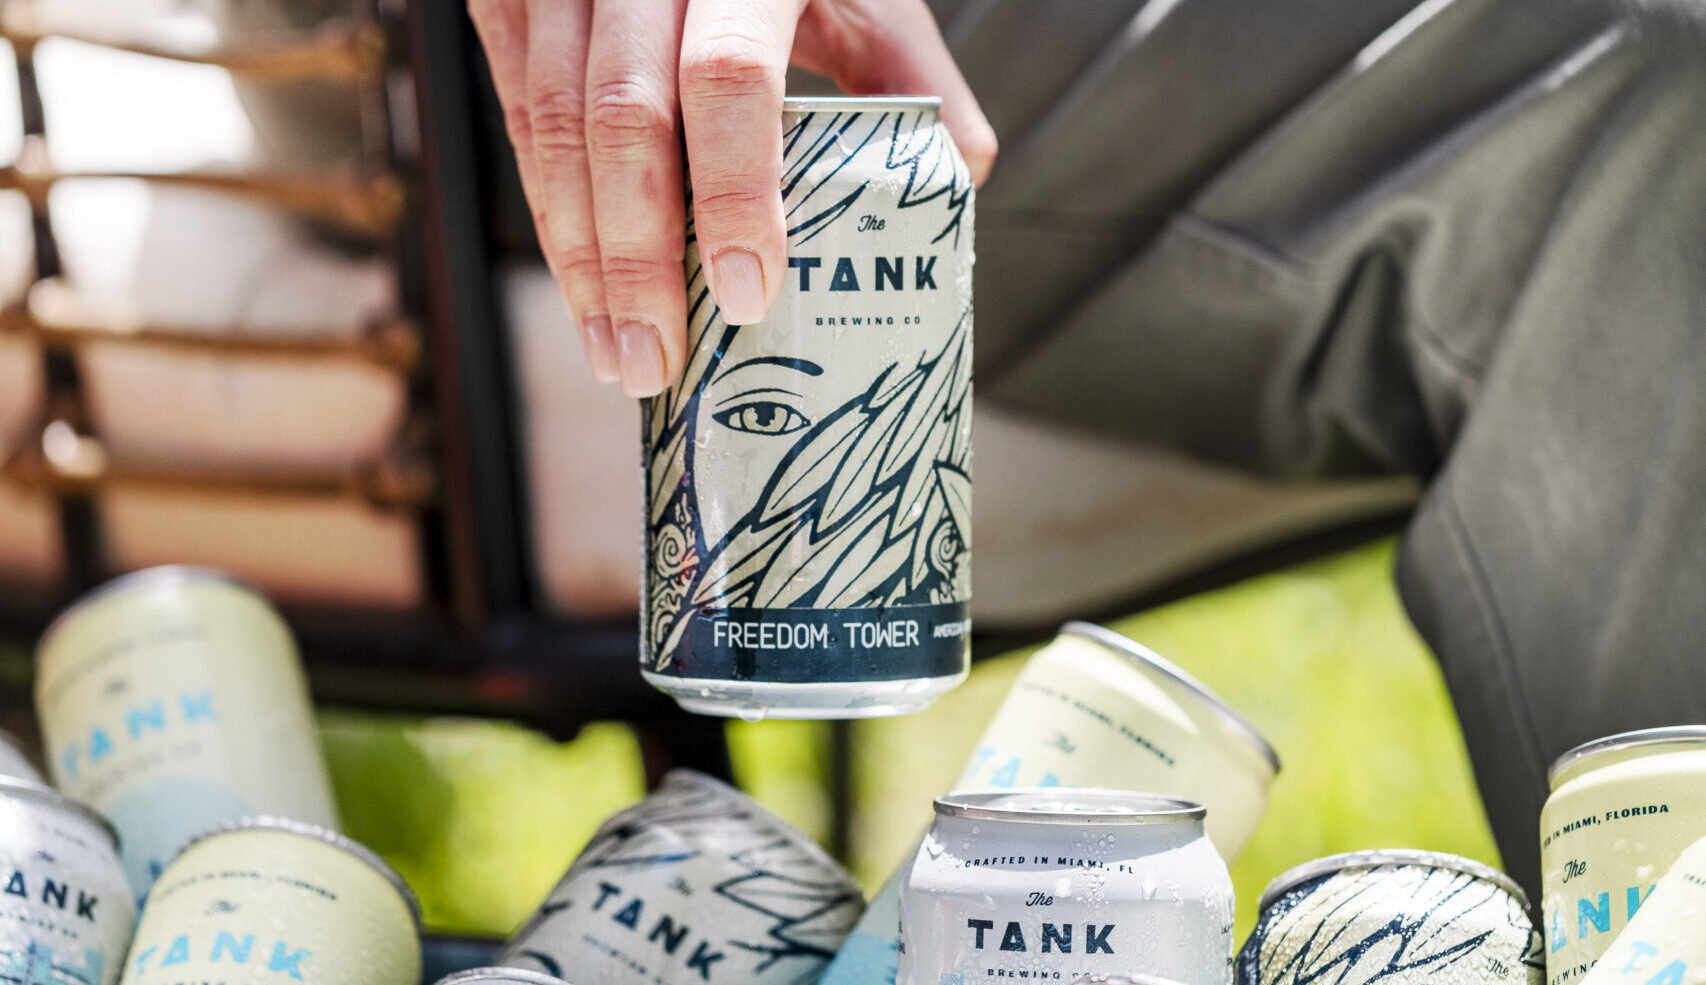 Tank Brewing Co Freedom tower beer being held above a cooler of more Tank Brewing Co. beers